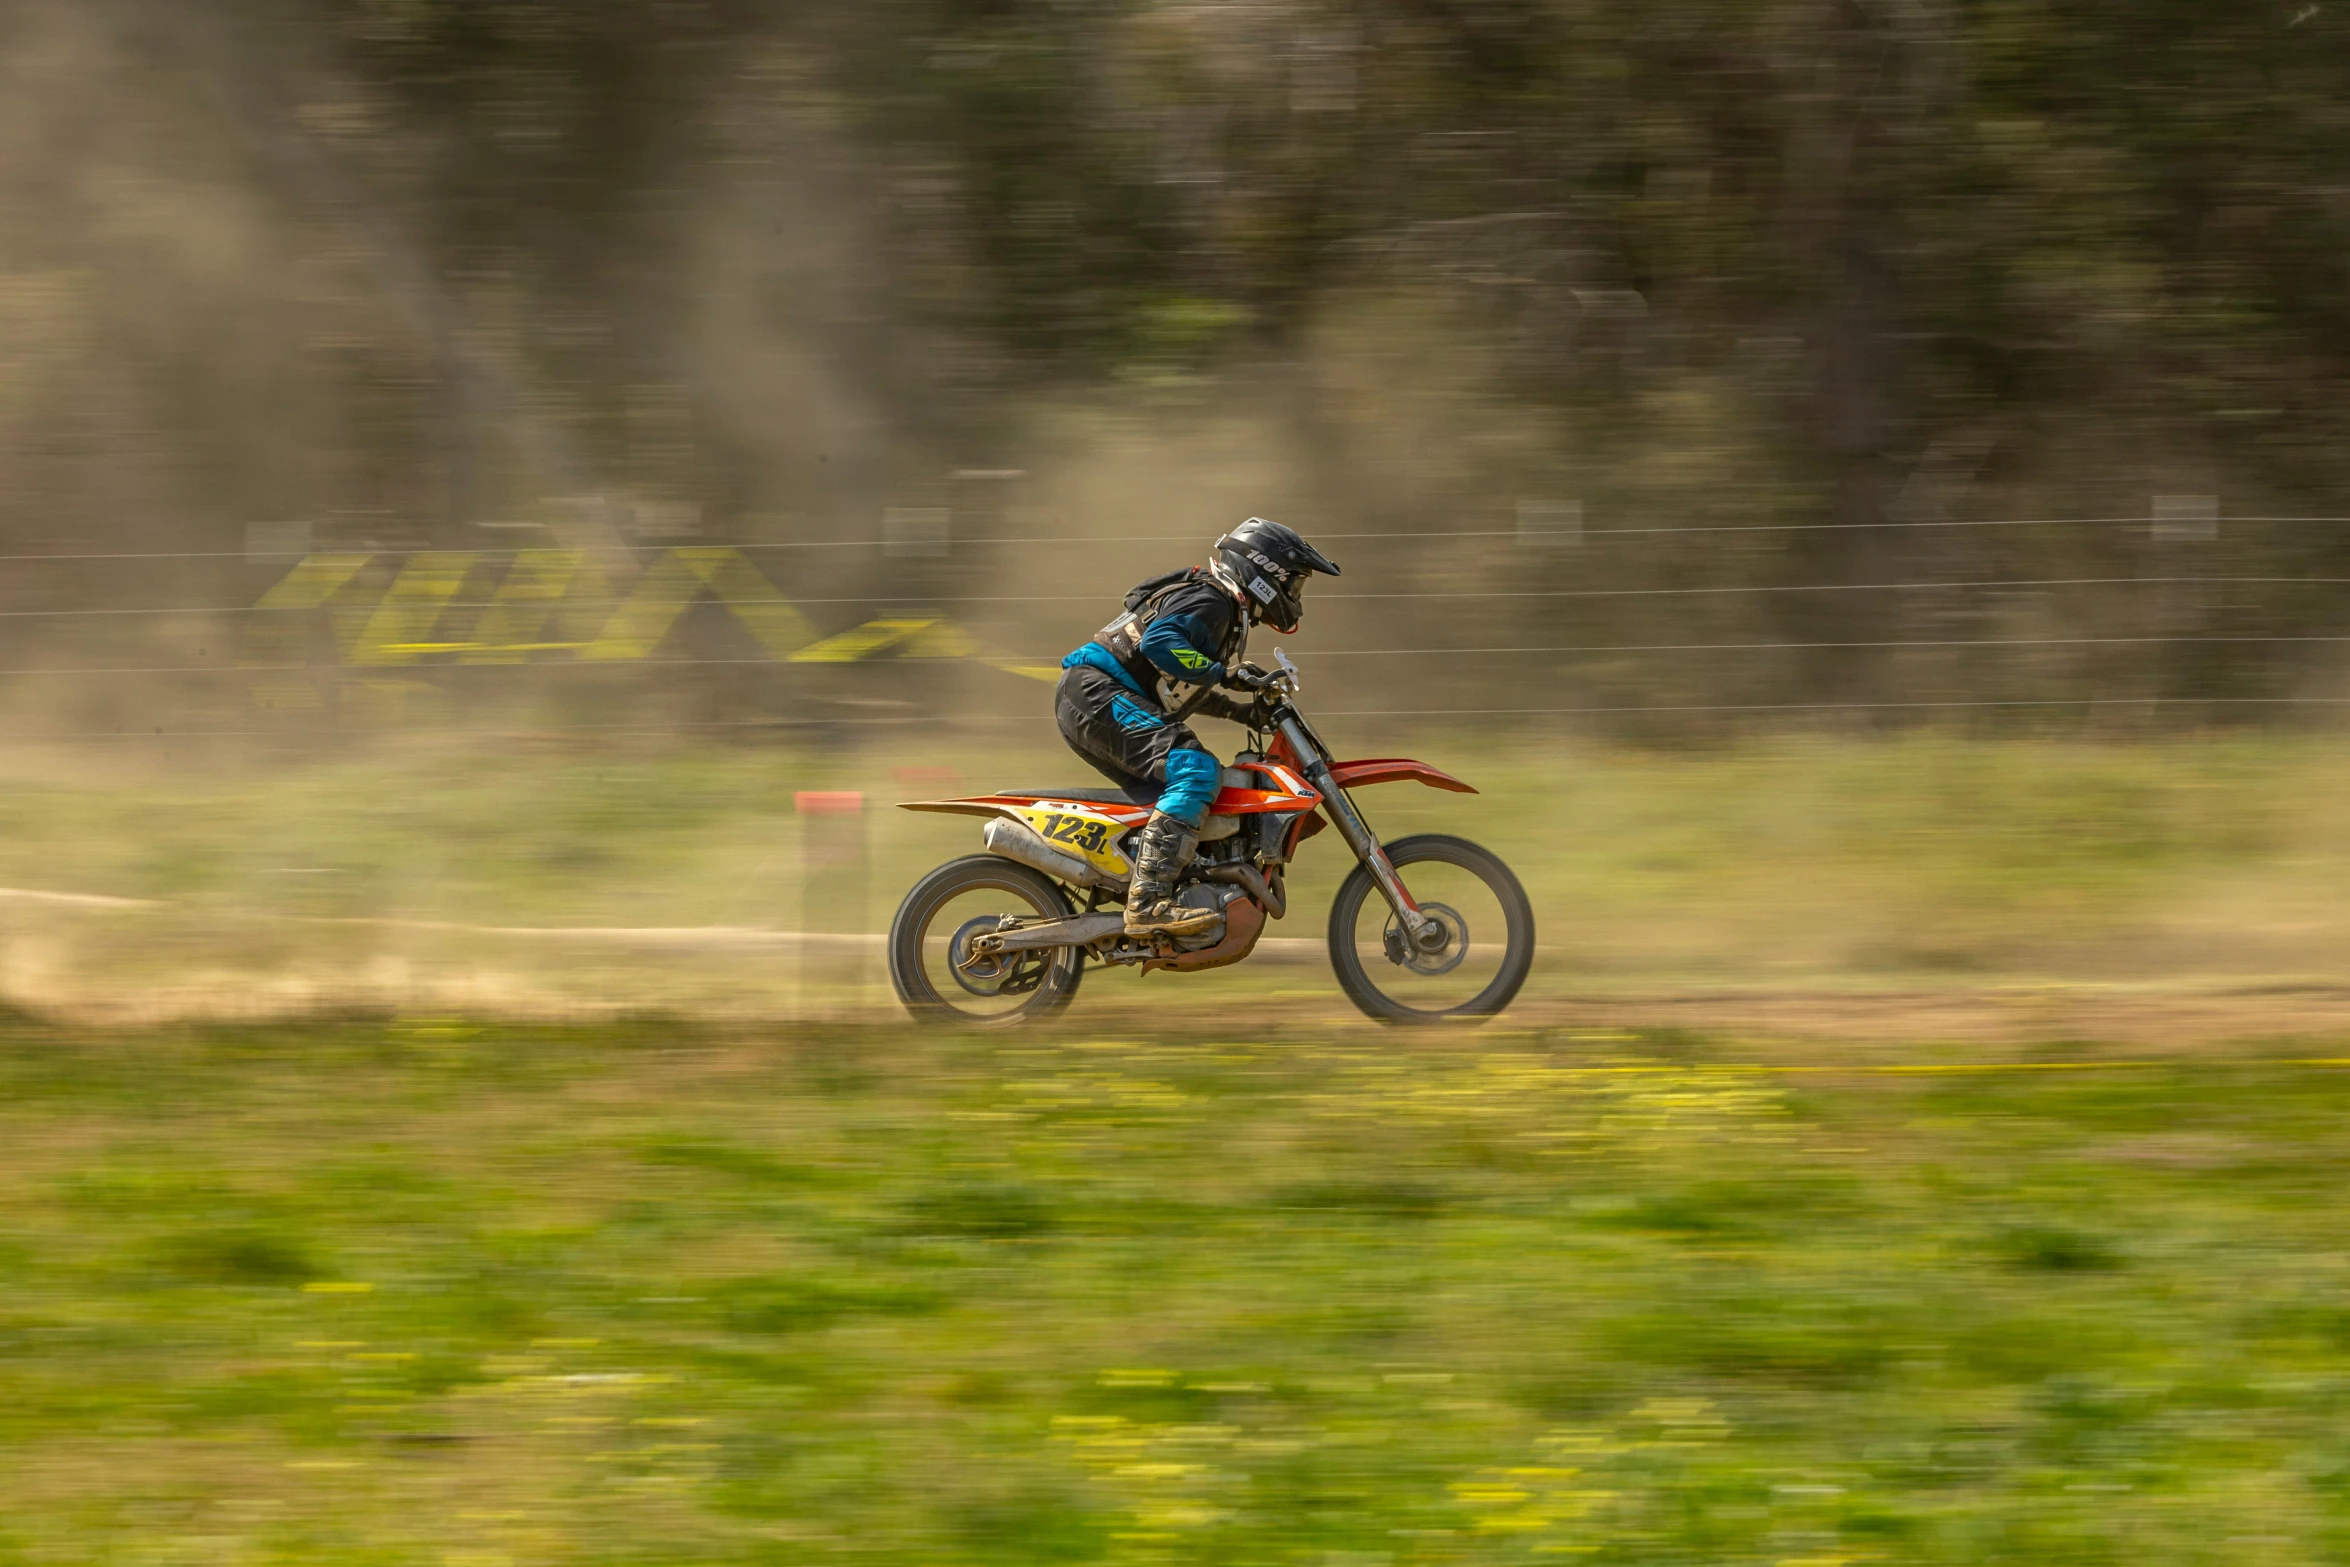 person on motor bike taking a turn on the dirt track